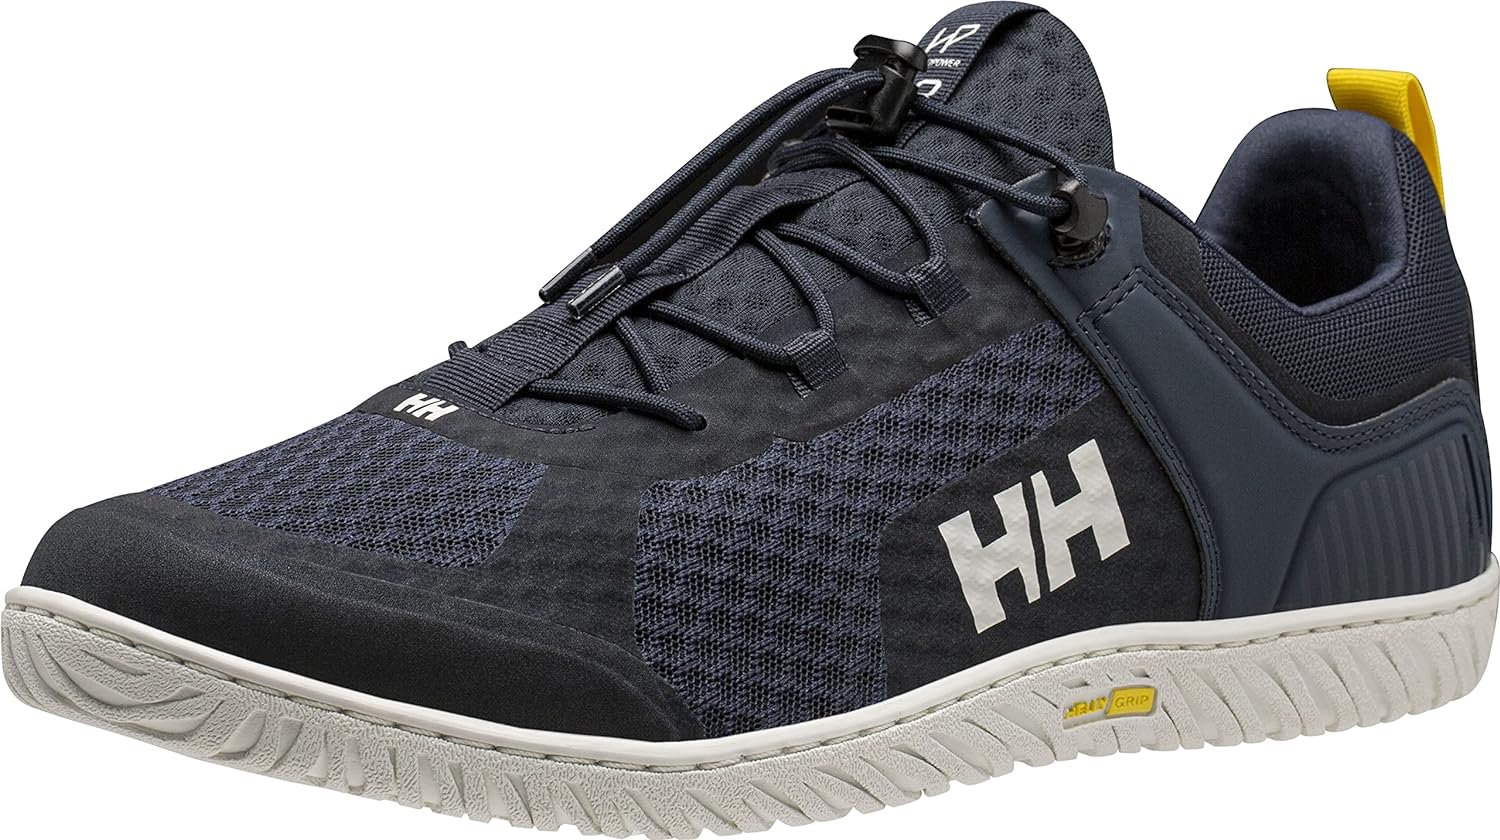 You are currently viewing Helly Hansen Mens HP Foil V2 Sailing Shoes Review